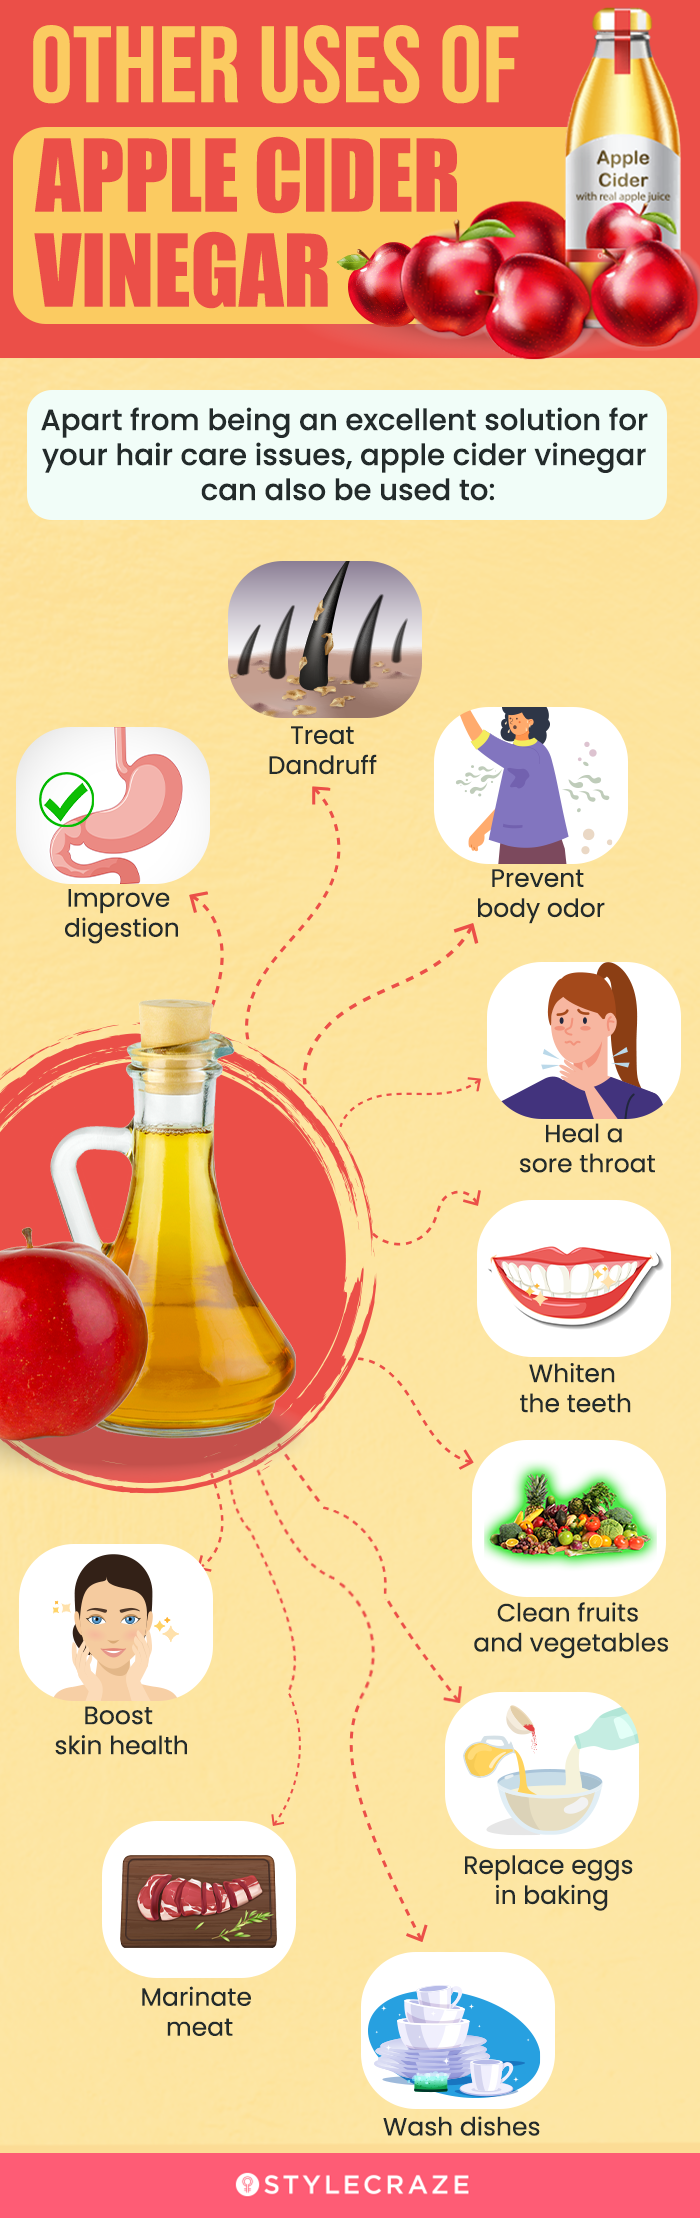 other uses of apple cider vinegar (infographic)